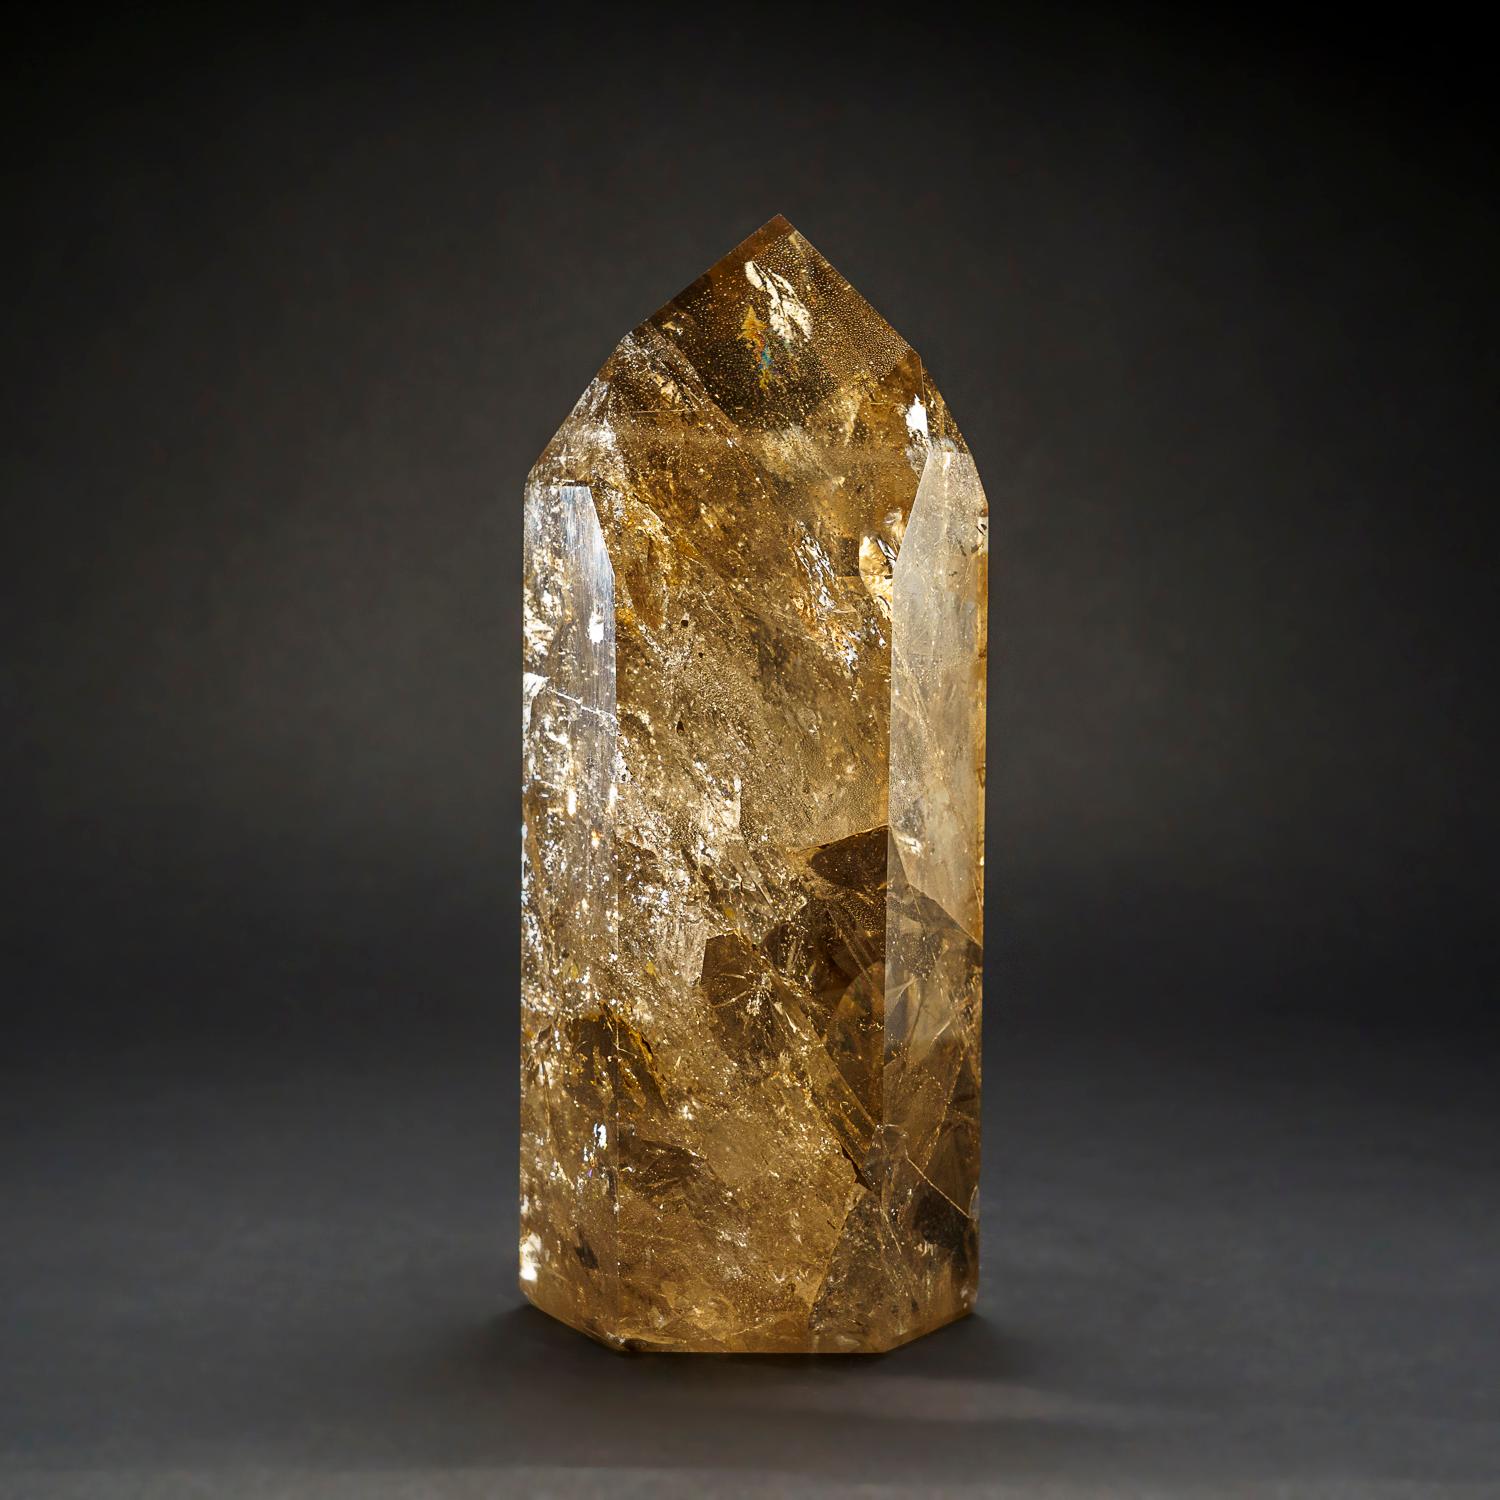 Brazilian Genuine Large Smoky Quartz Crystal Point From Brazil (8 lbs) For Sale